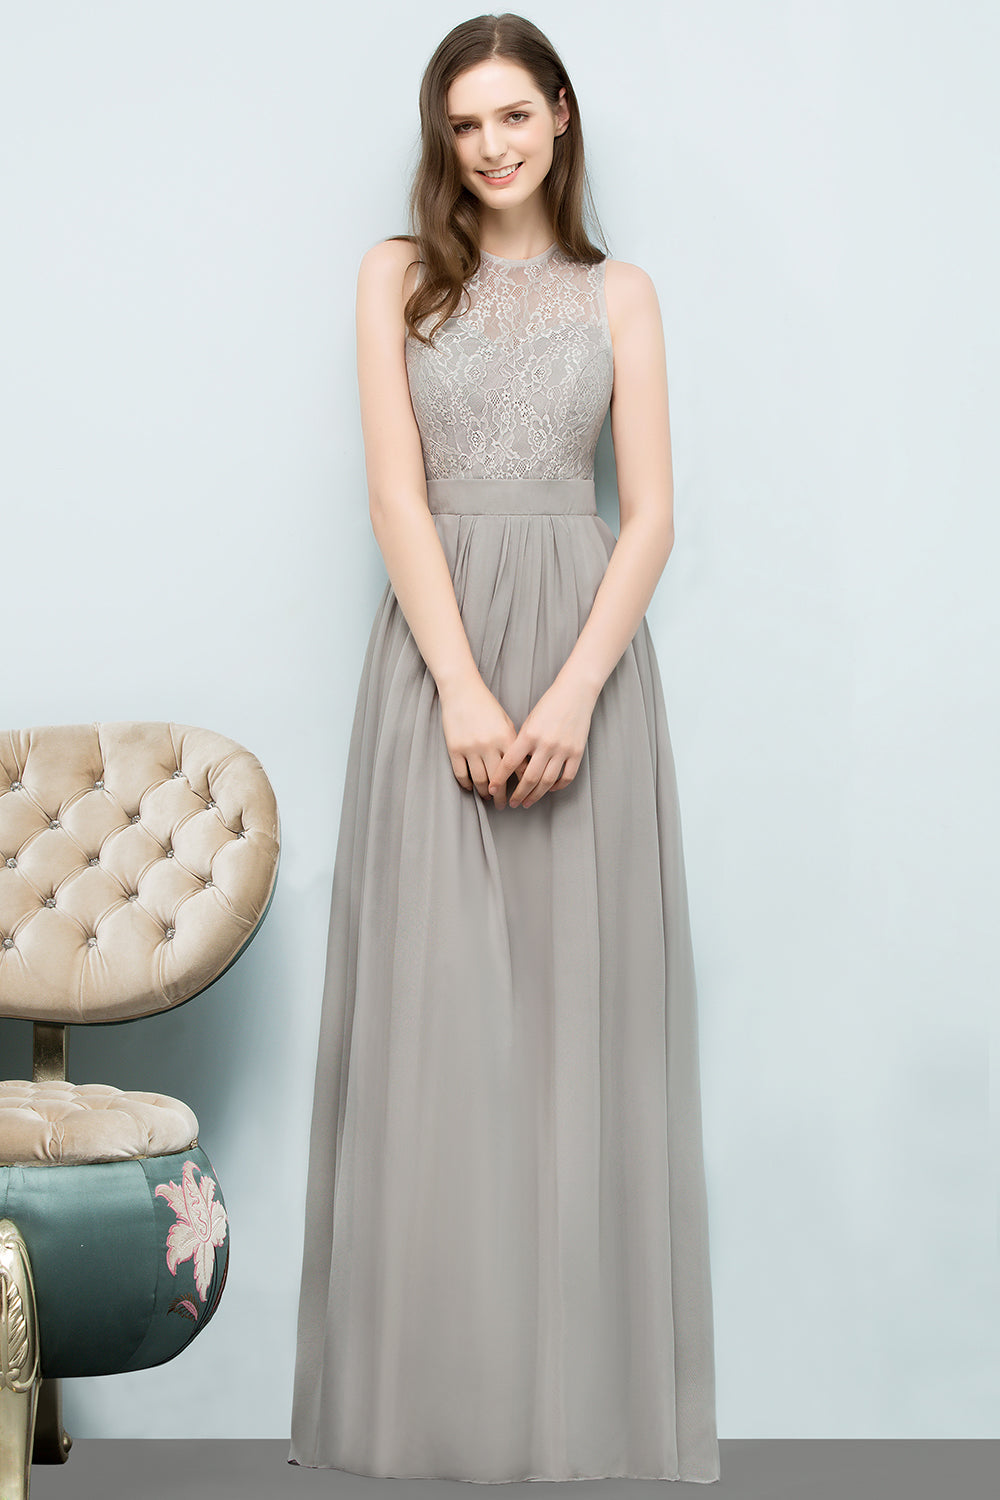 Affordable Lace Sleeveless Silver Bridesmaid Dress with Ruffles-27dress